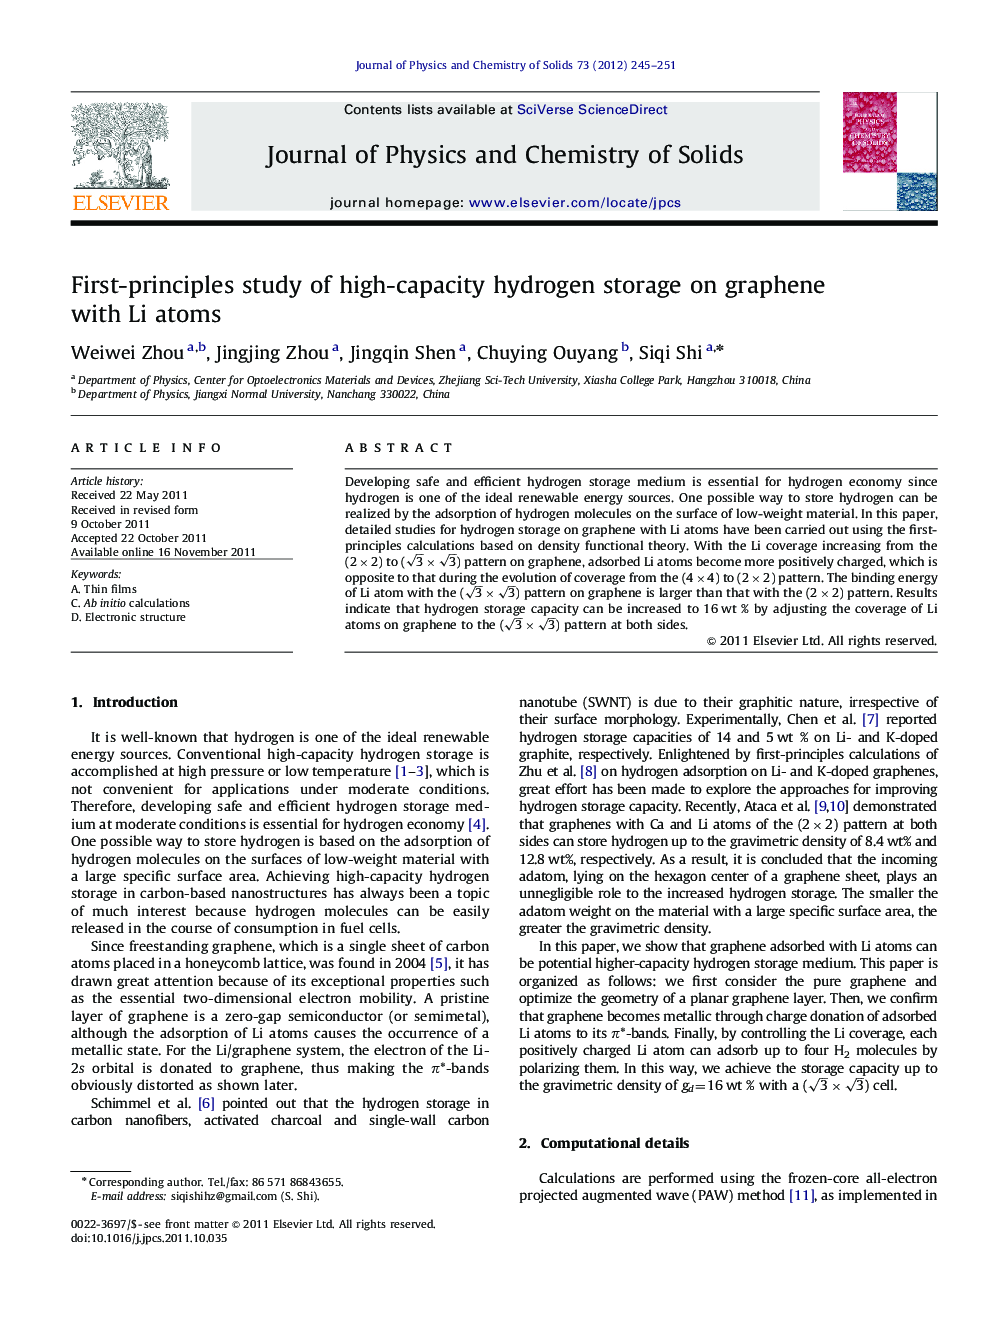 First-principles study of high-capacity hydrogen storage on graphene with Li atoms